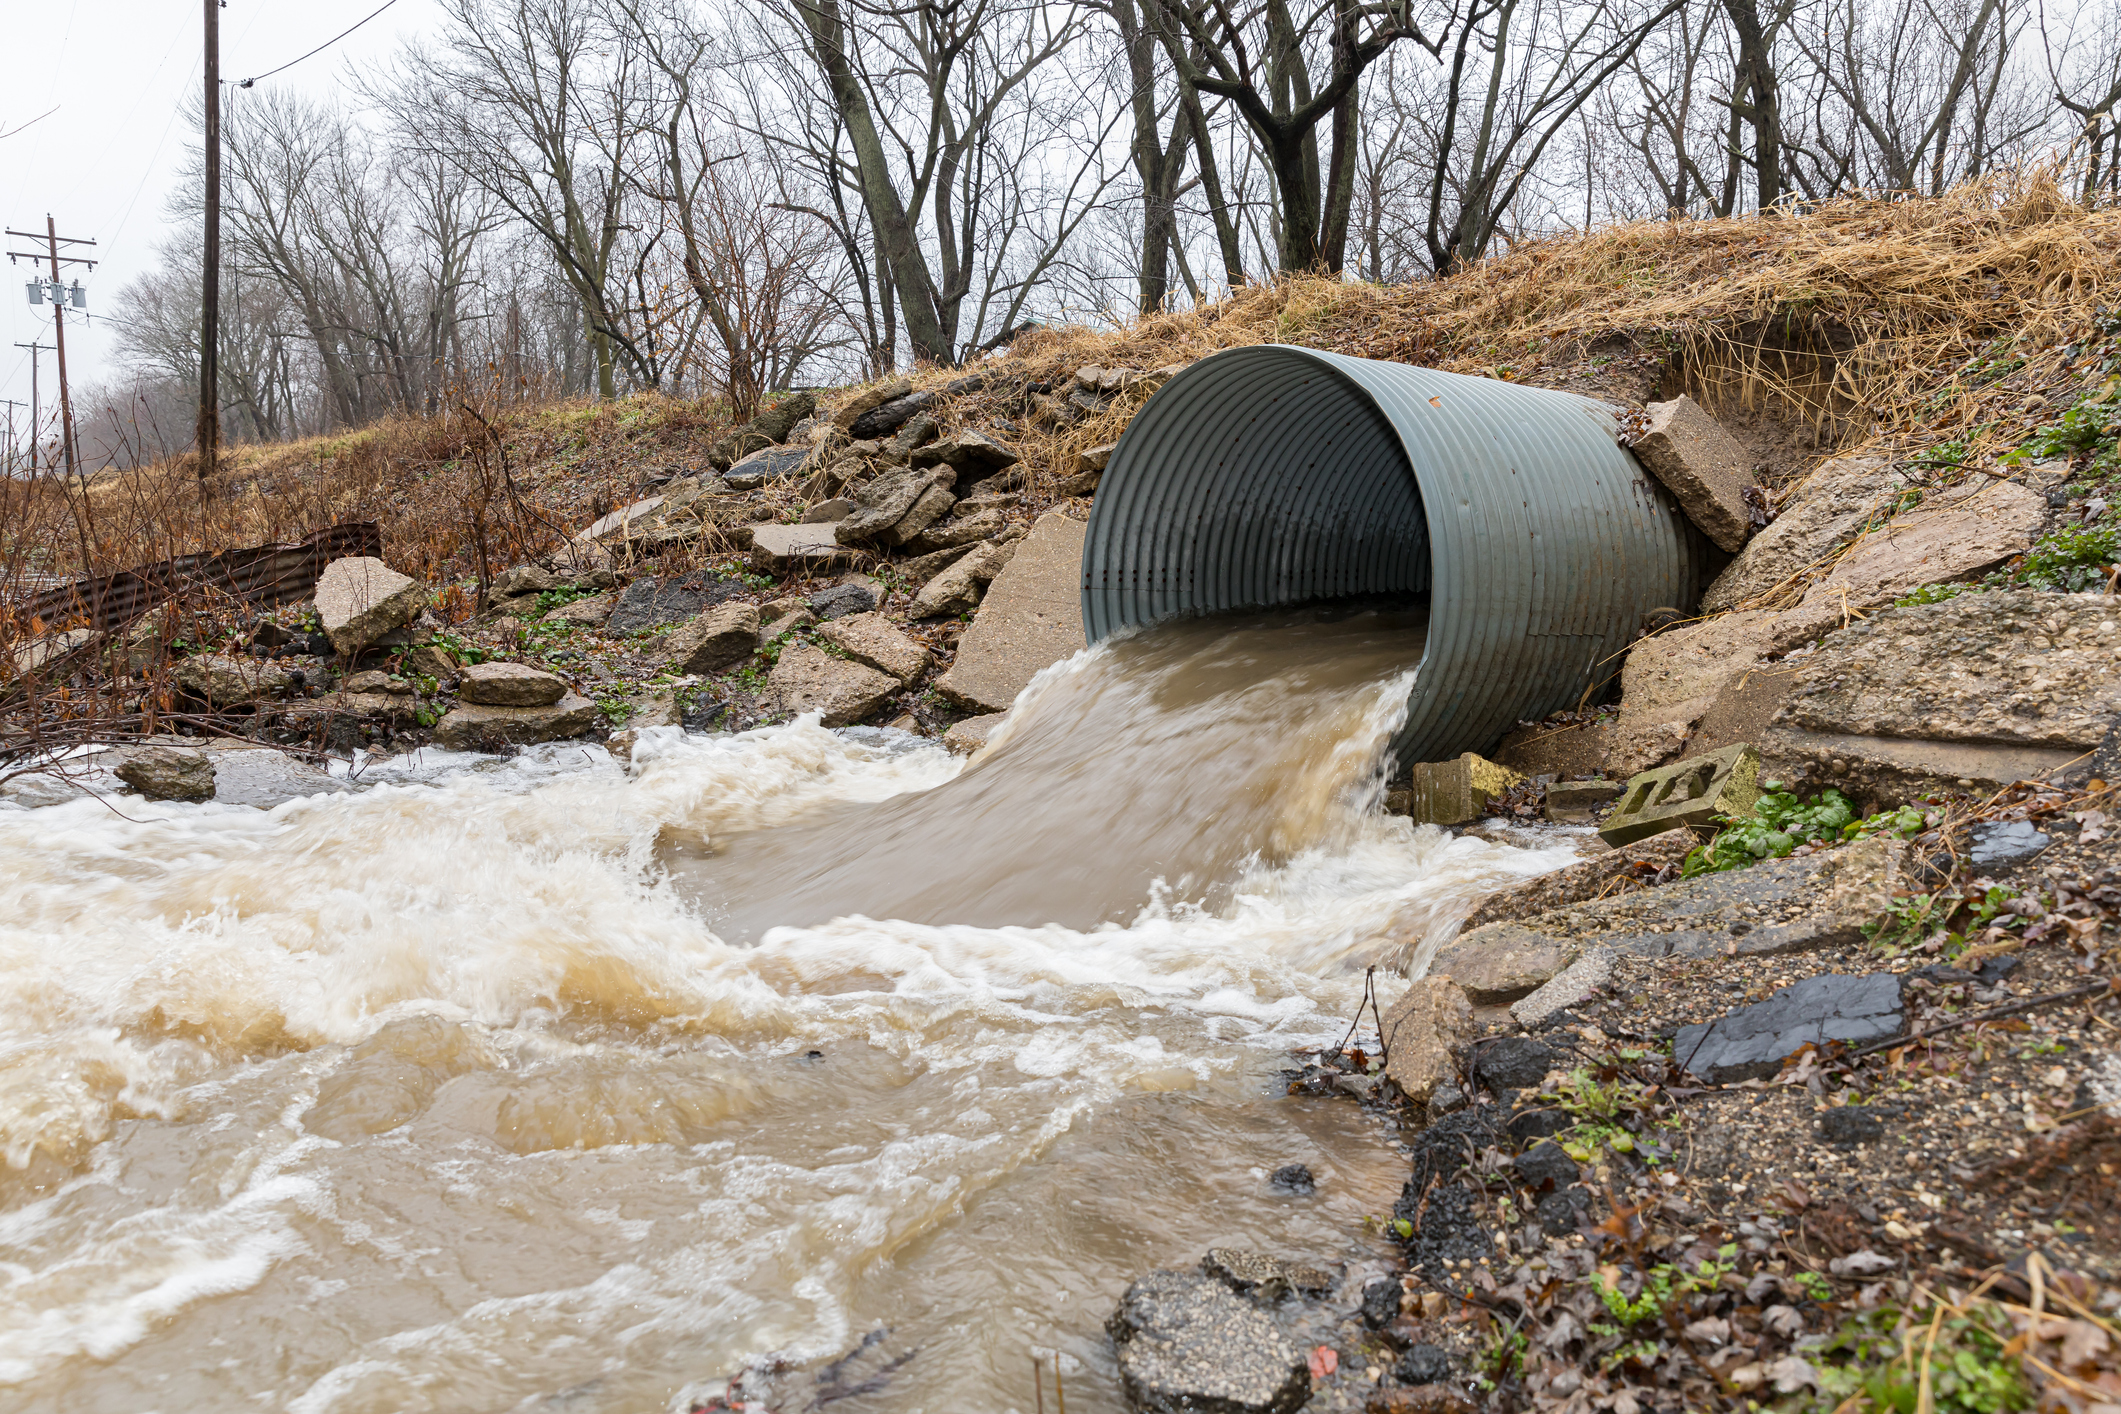 Water gushes out of a large drainage pipe during a 100-year storm event